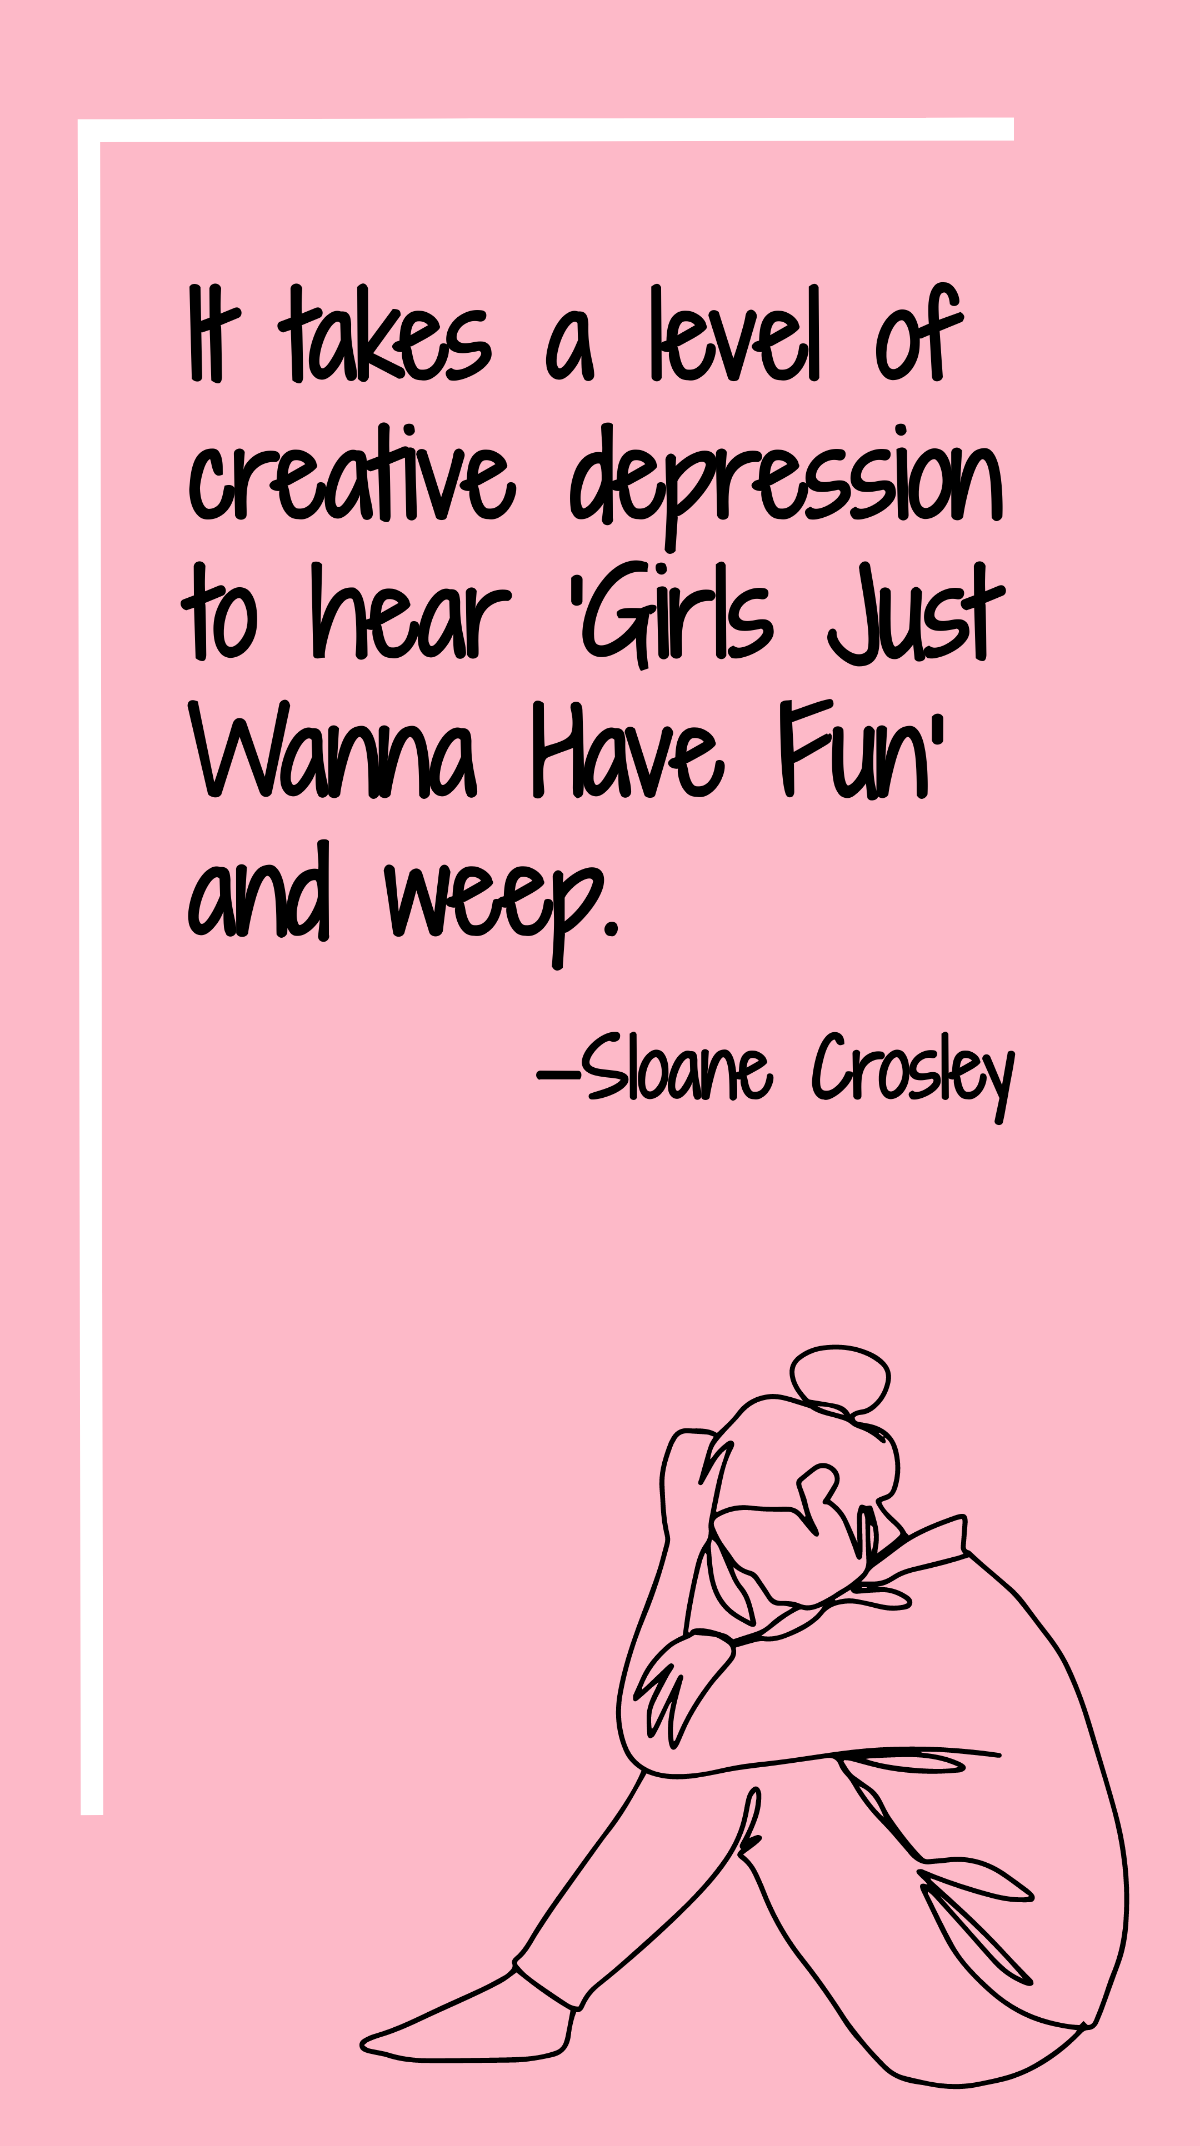 Sloane Crosley - It takes a level of creative depression to hear 'Girls Just Wanna Have Fun' and weep. Template